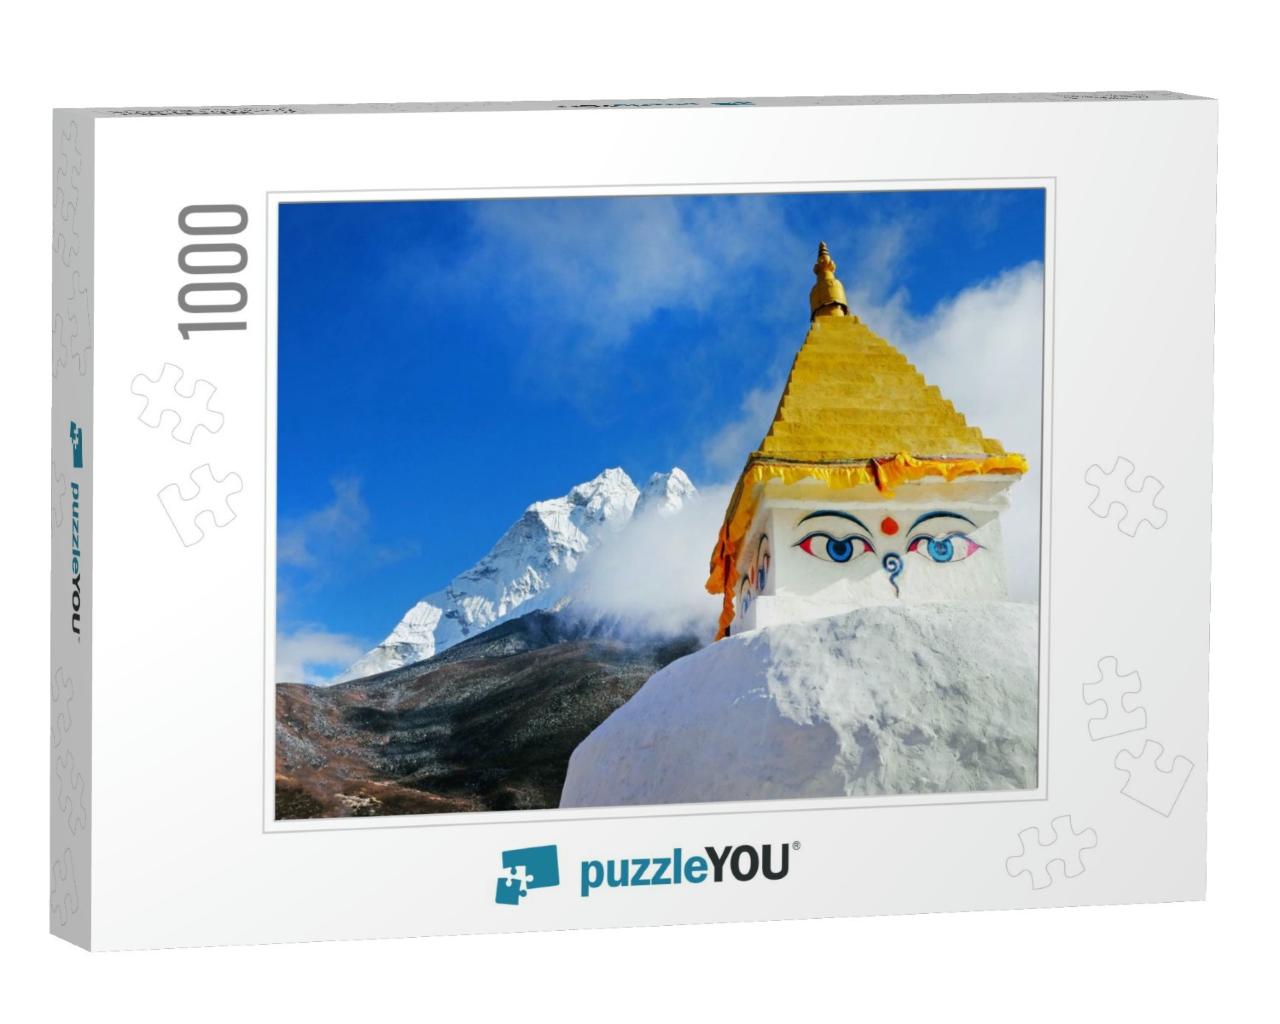 Buddhist Stupa & Prayer Flags in the Himalaya Mountains... Jigsaw Puzzle with 1000 pieces